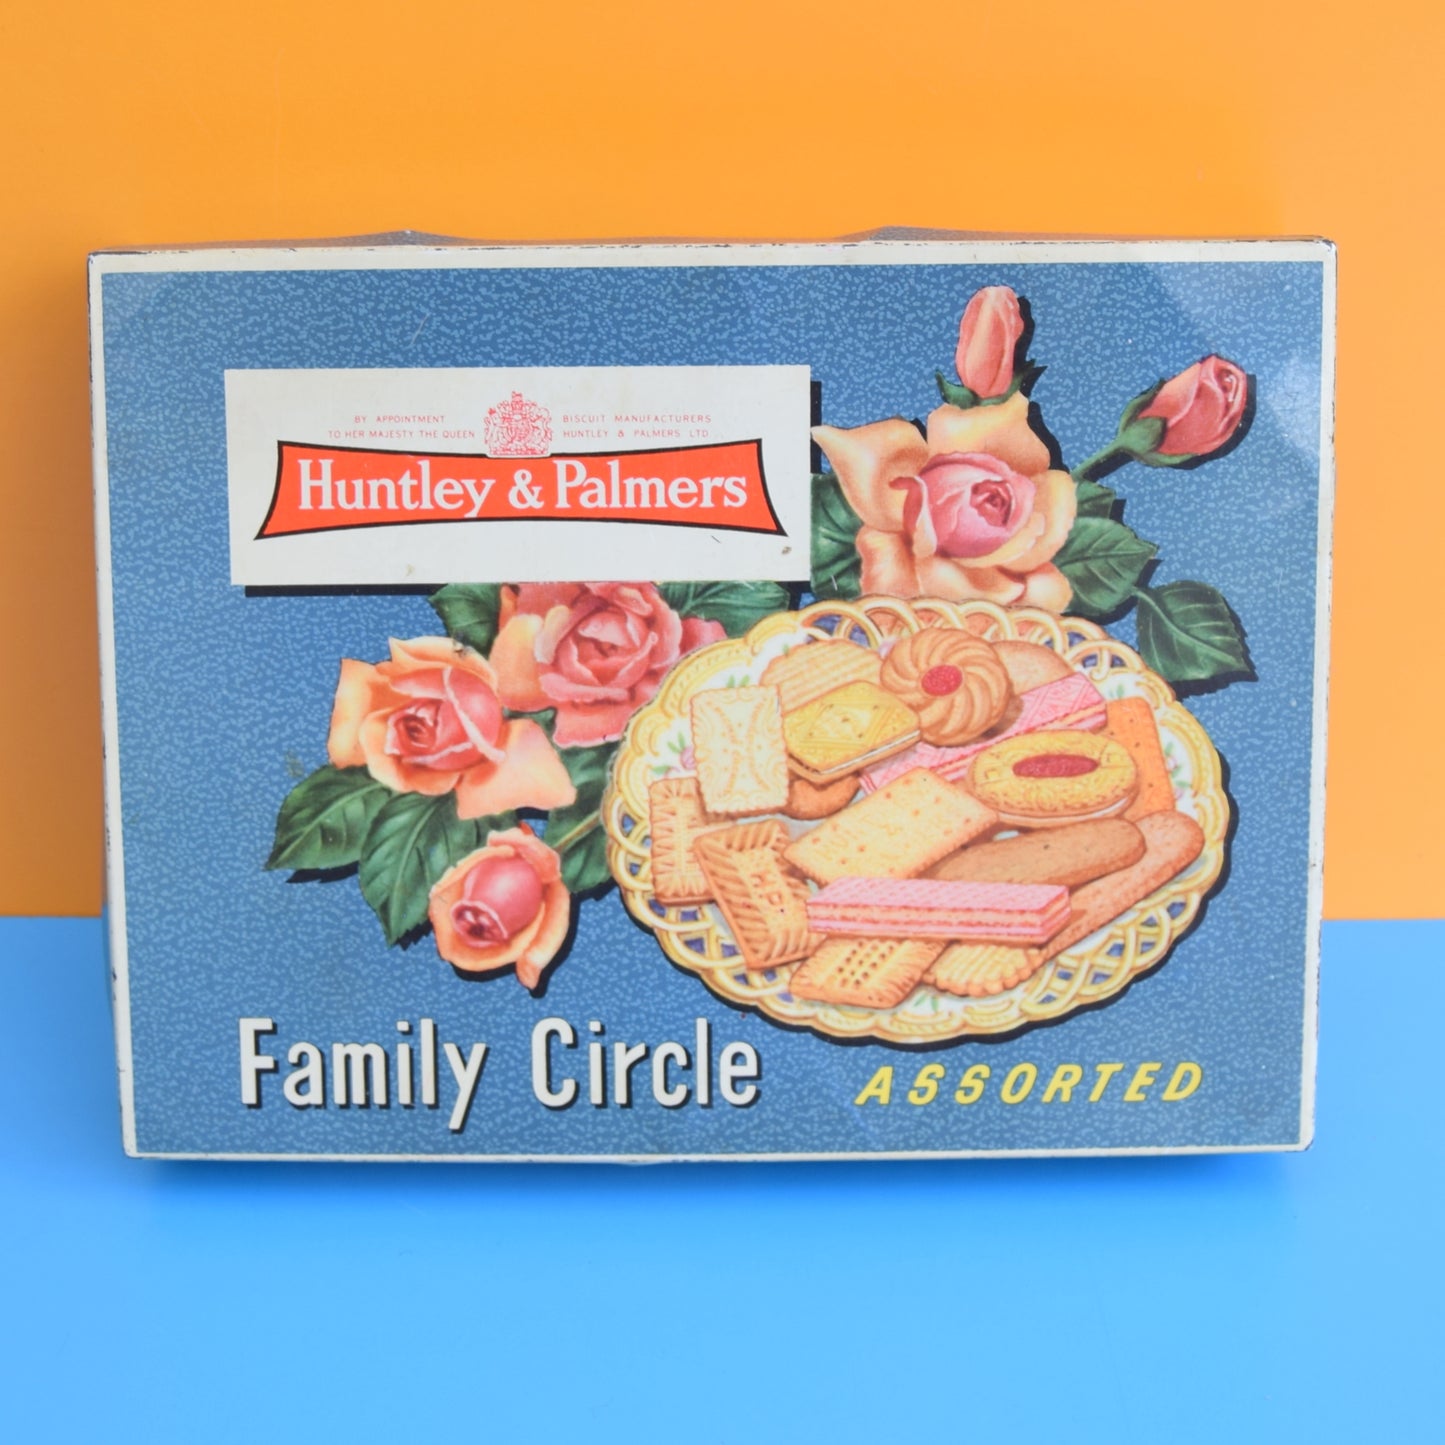 Vintage 1950s Tin - Huntley & Palmers Roses & Classic Biscuits